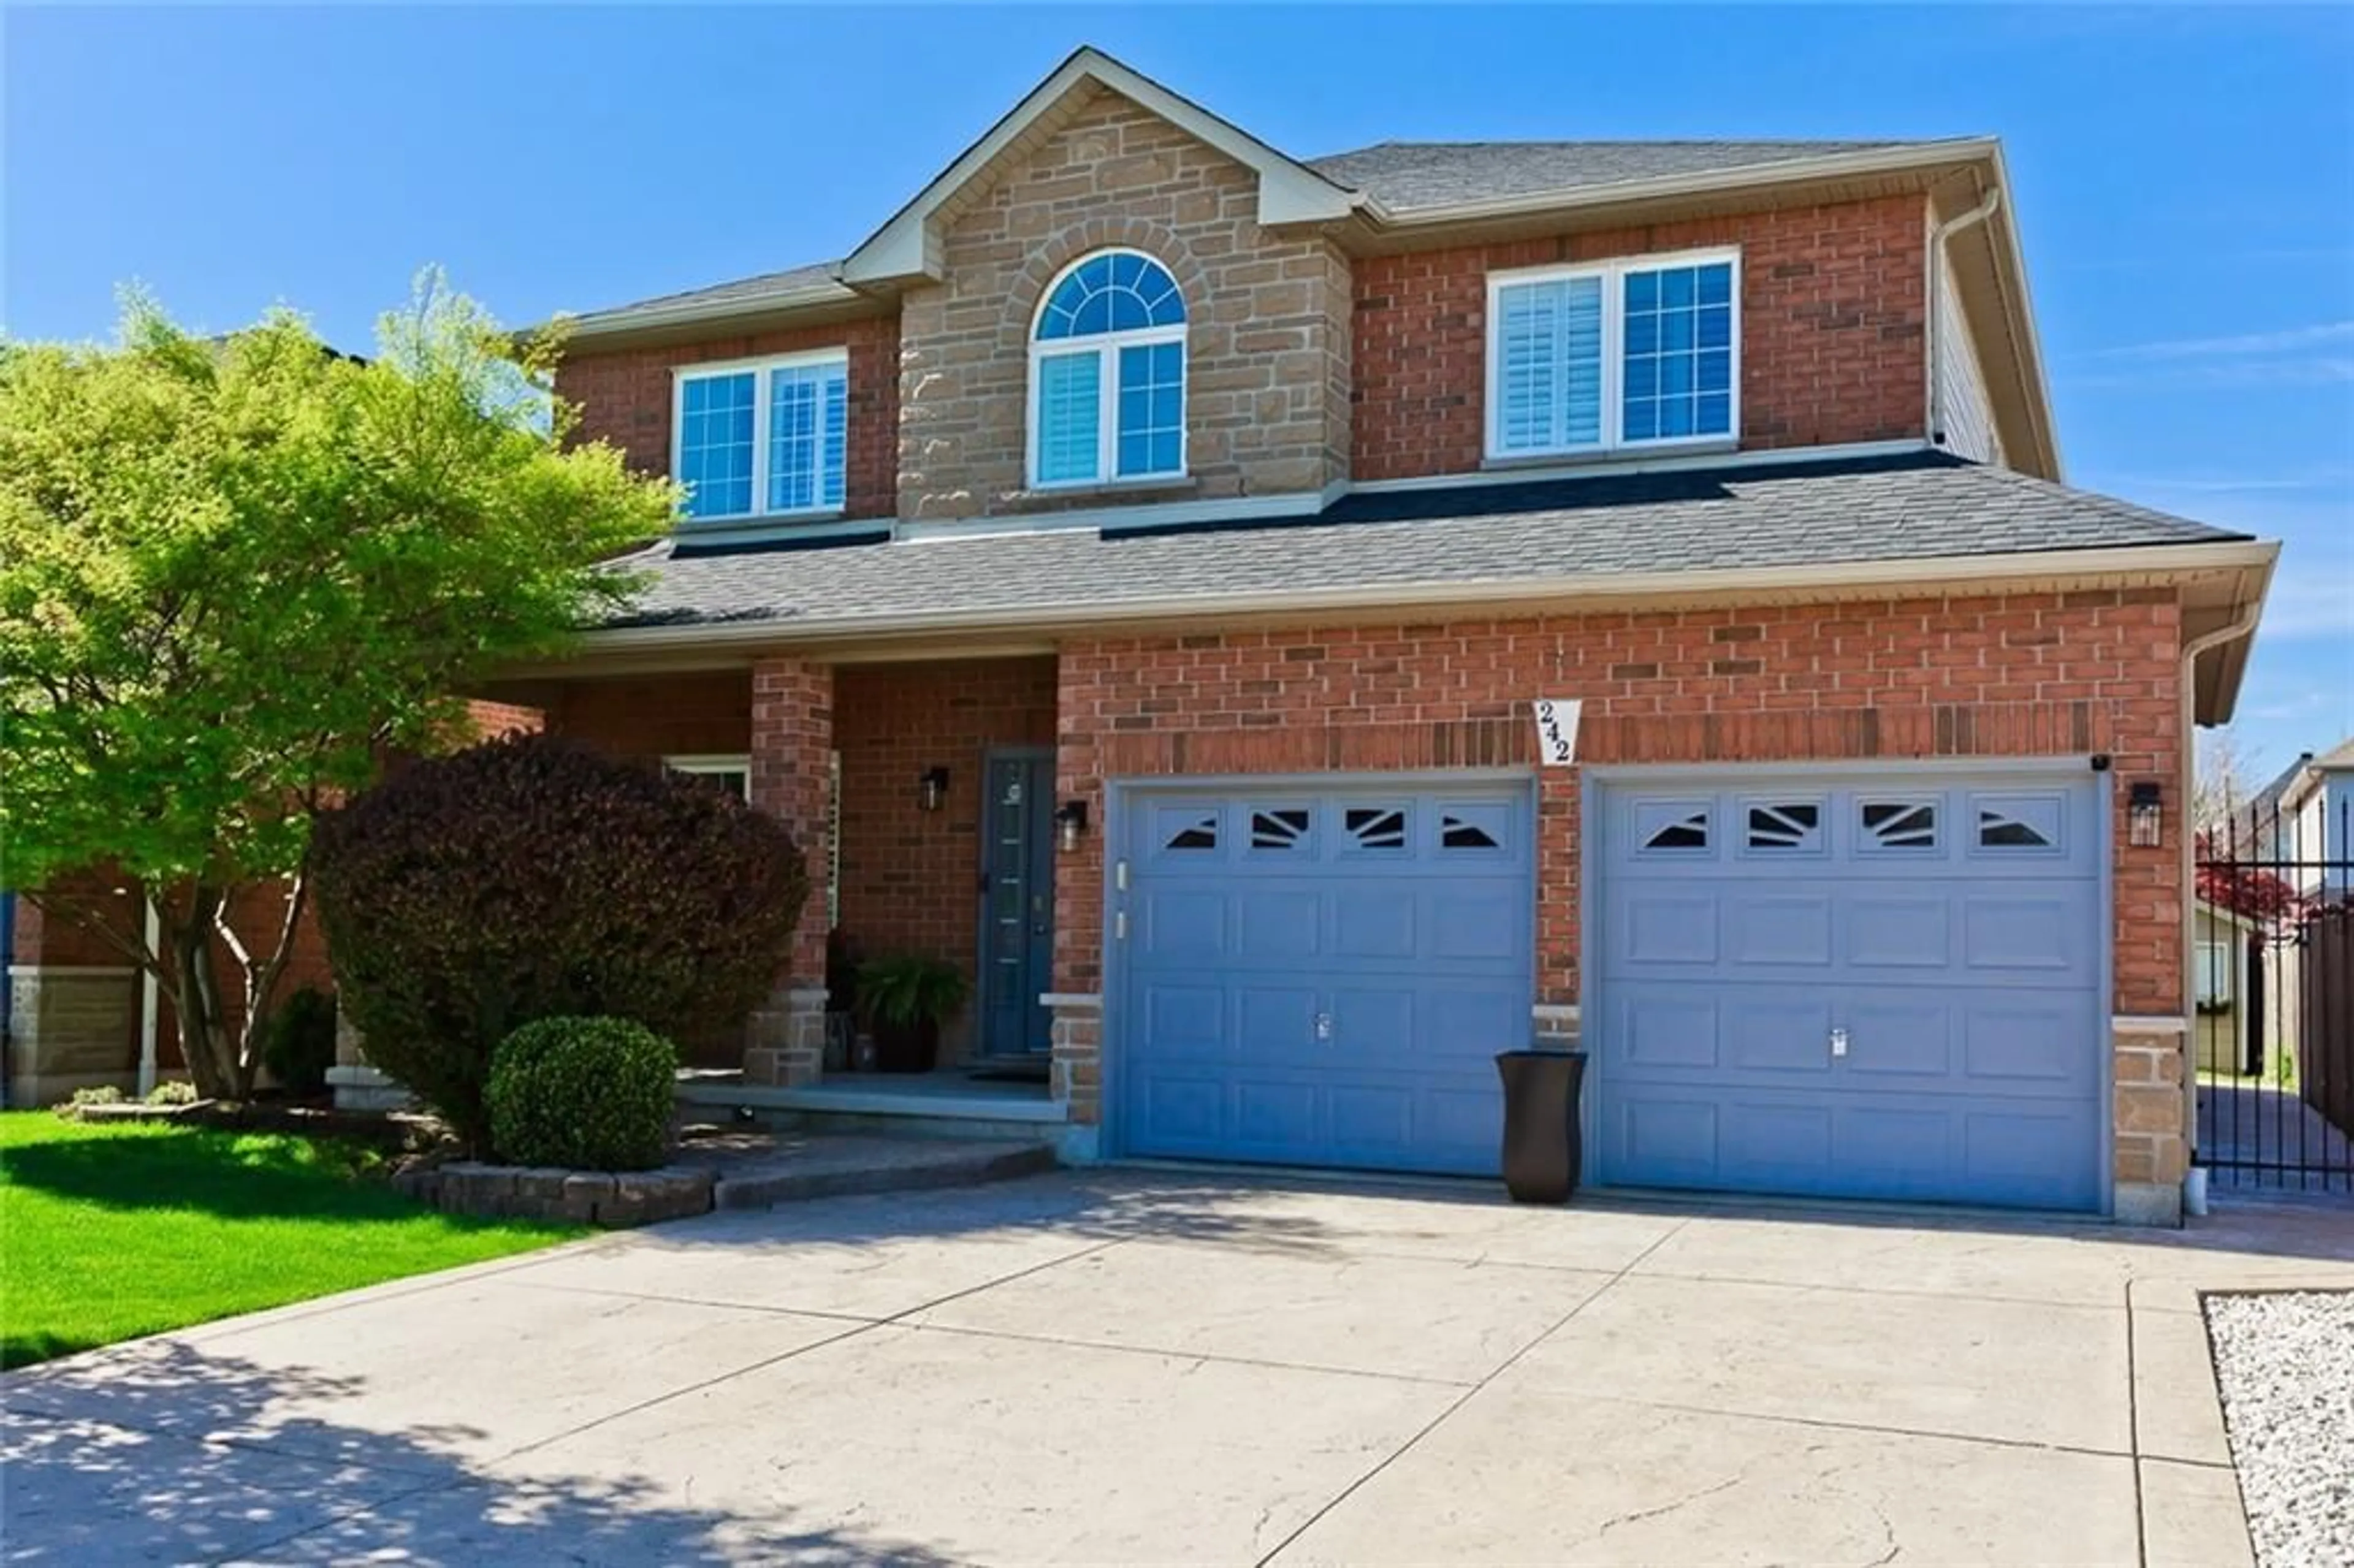 Home with brick exterior material for 242 GATESTONE Dr, Stoney Creek Ontario L8J 3Y6